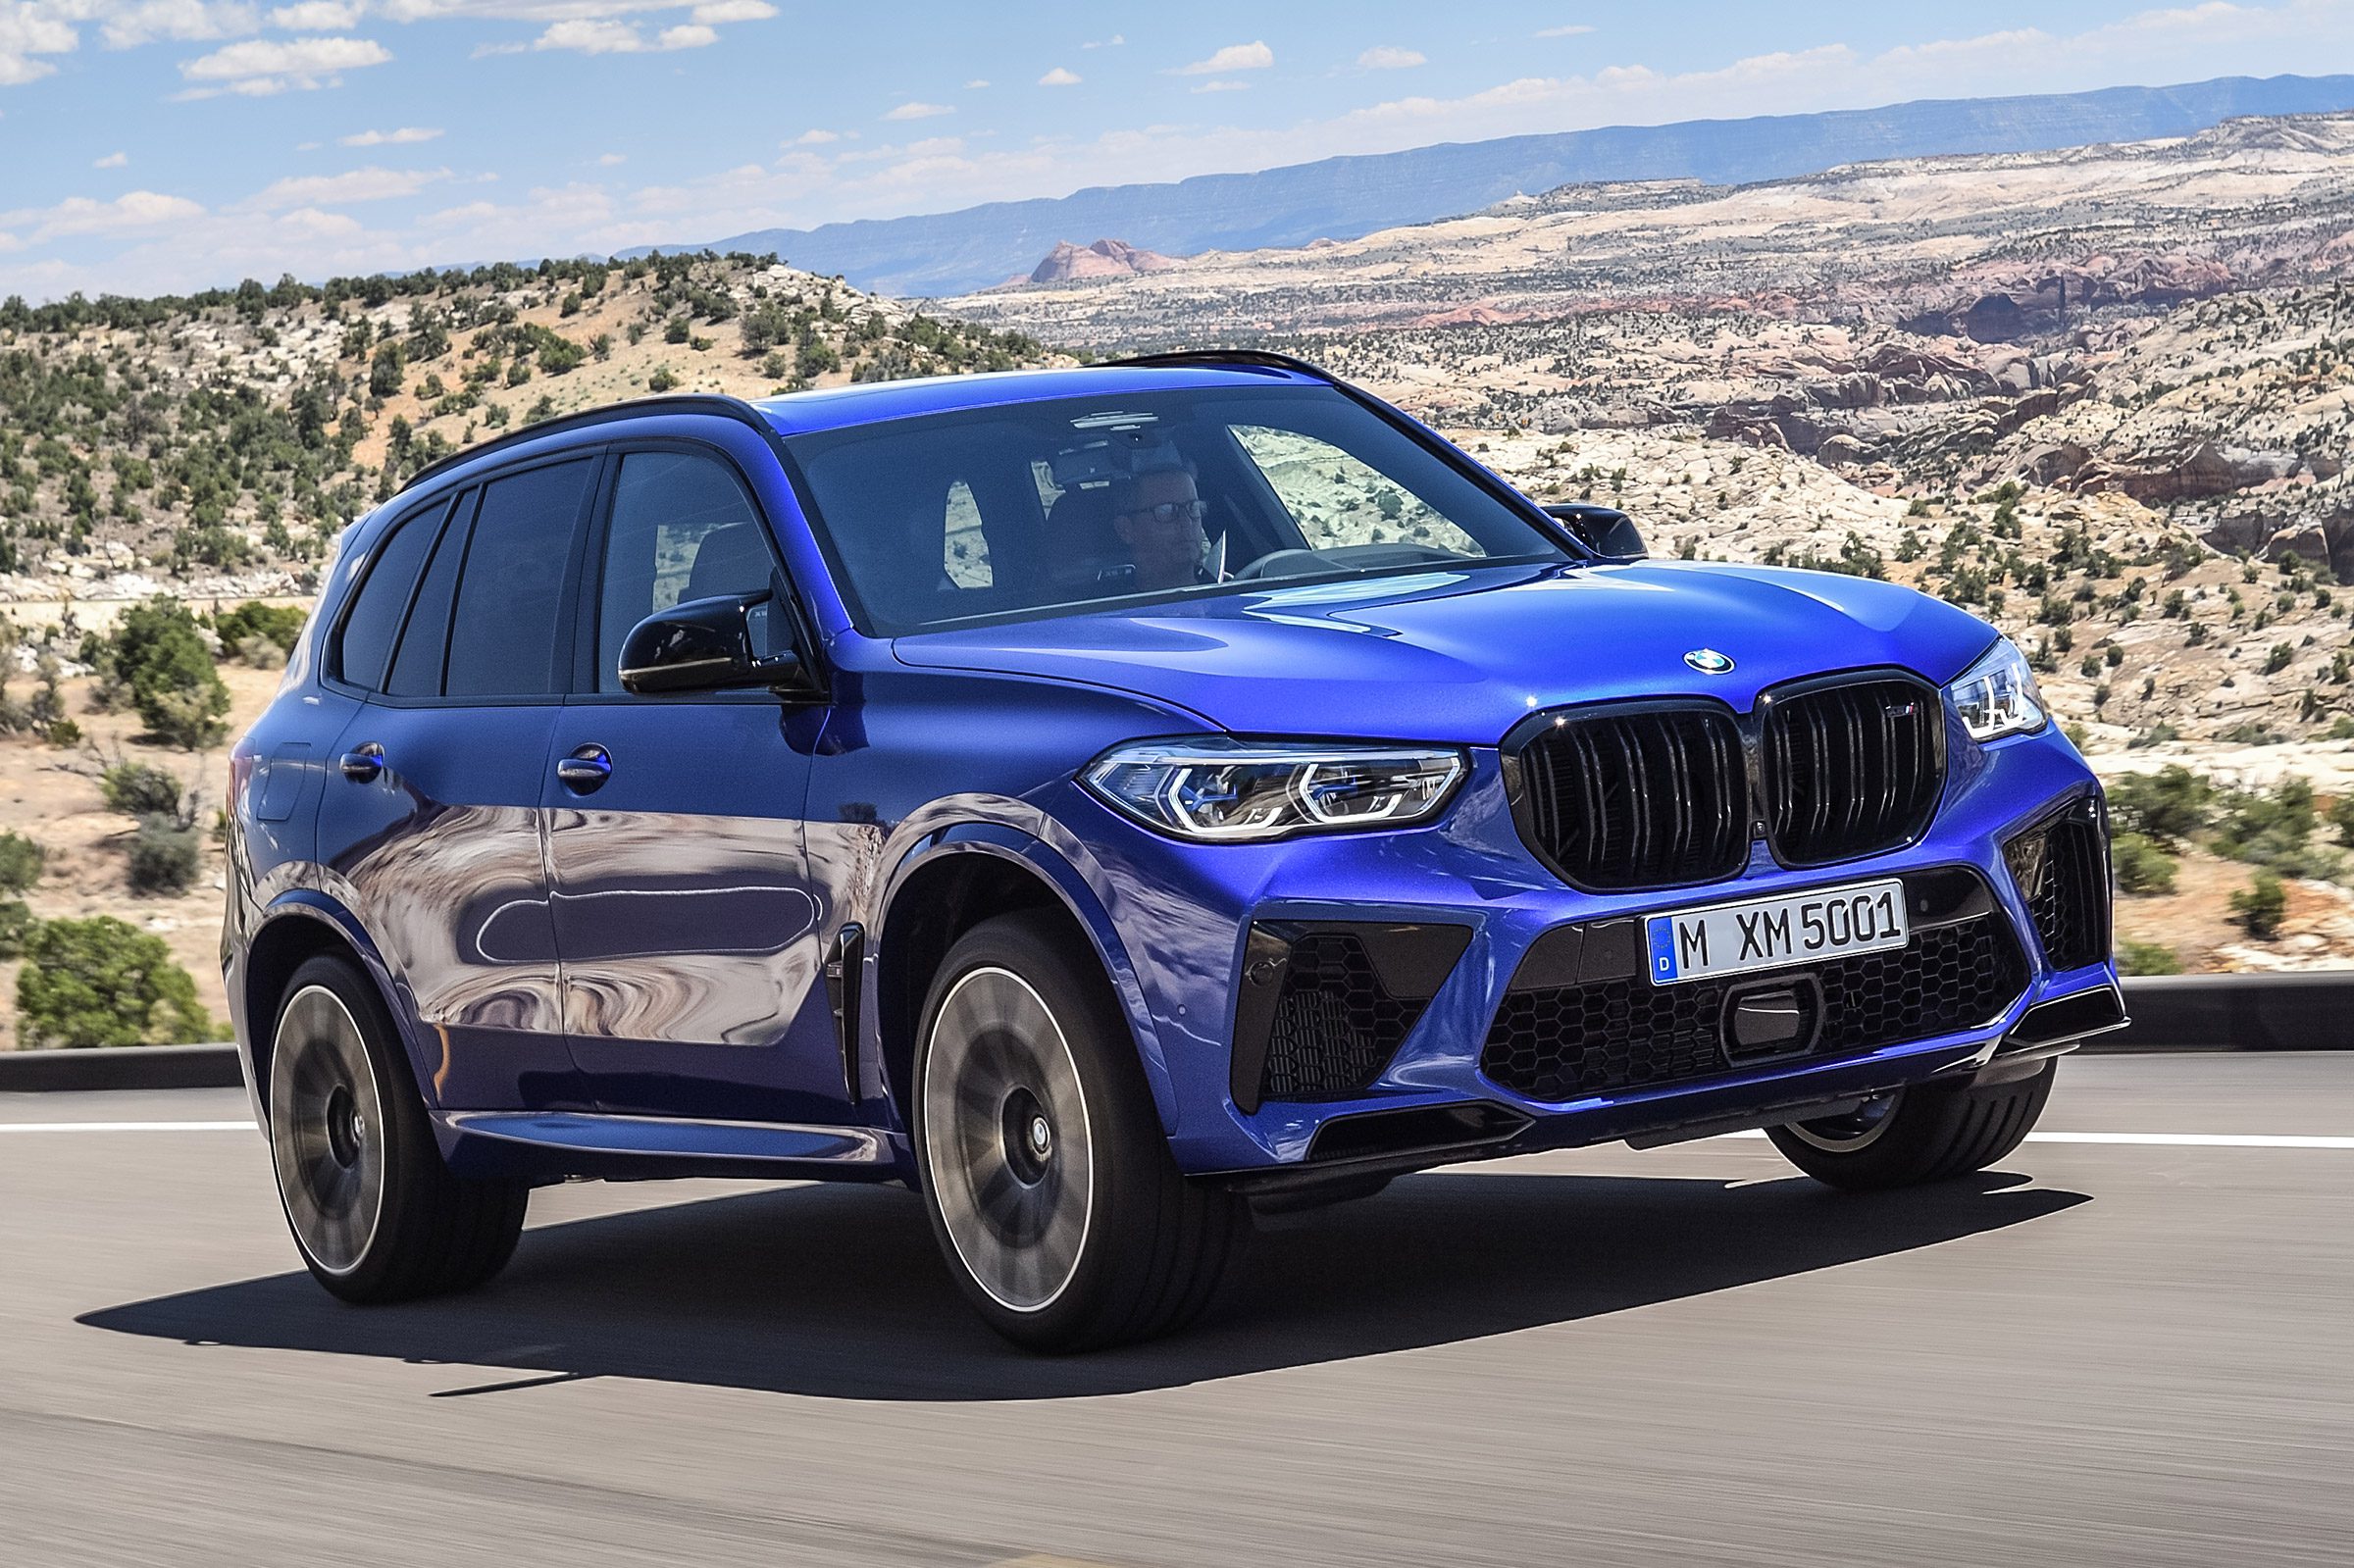 New 2020 BMW X5 M arrives with V8 power and 616bhp | Motor Memos